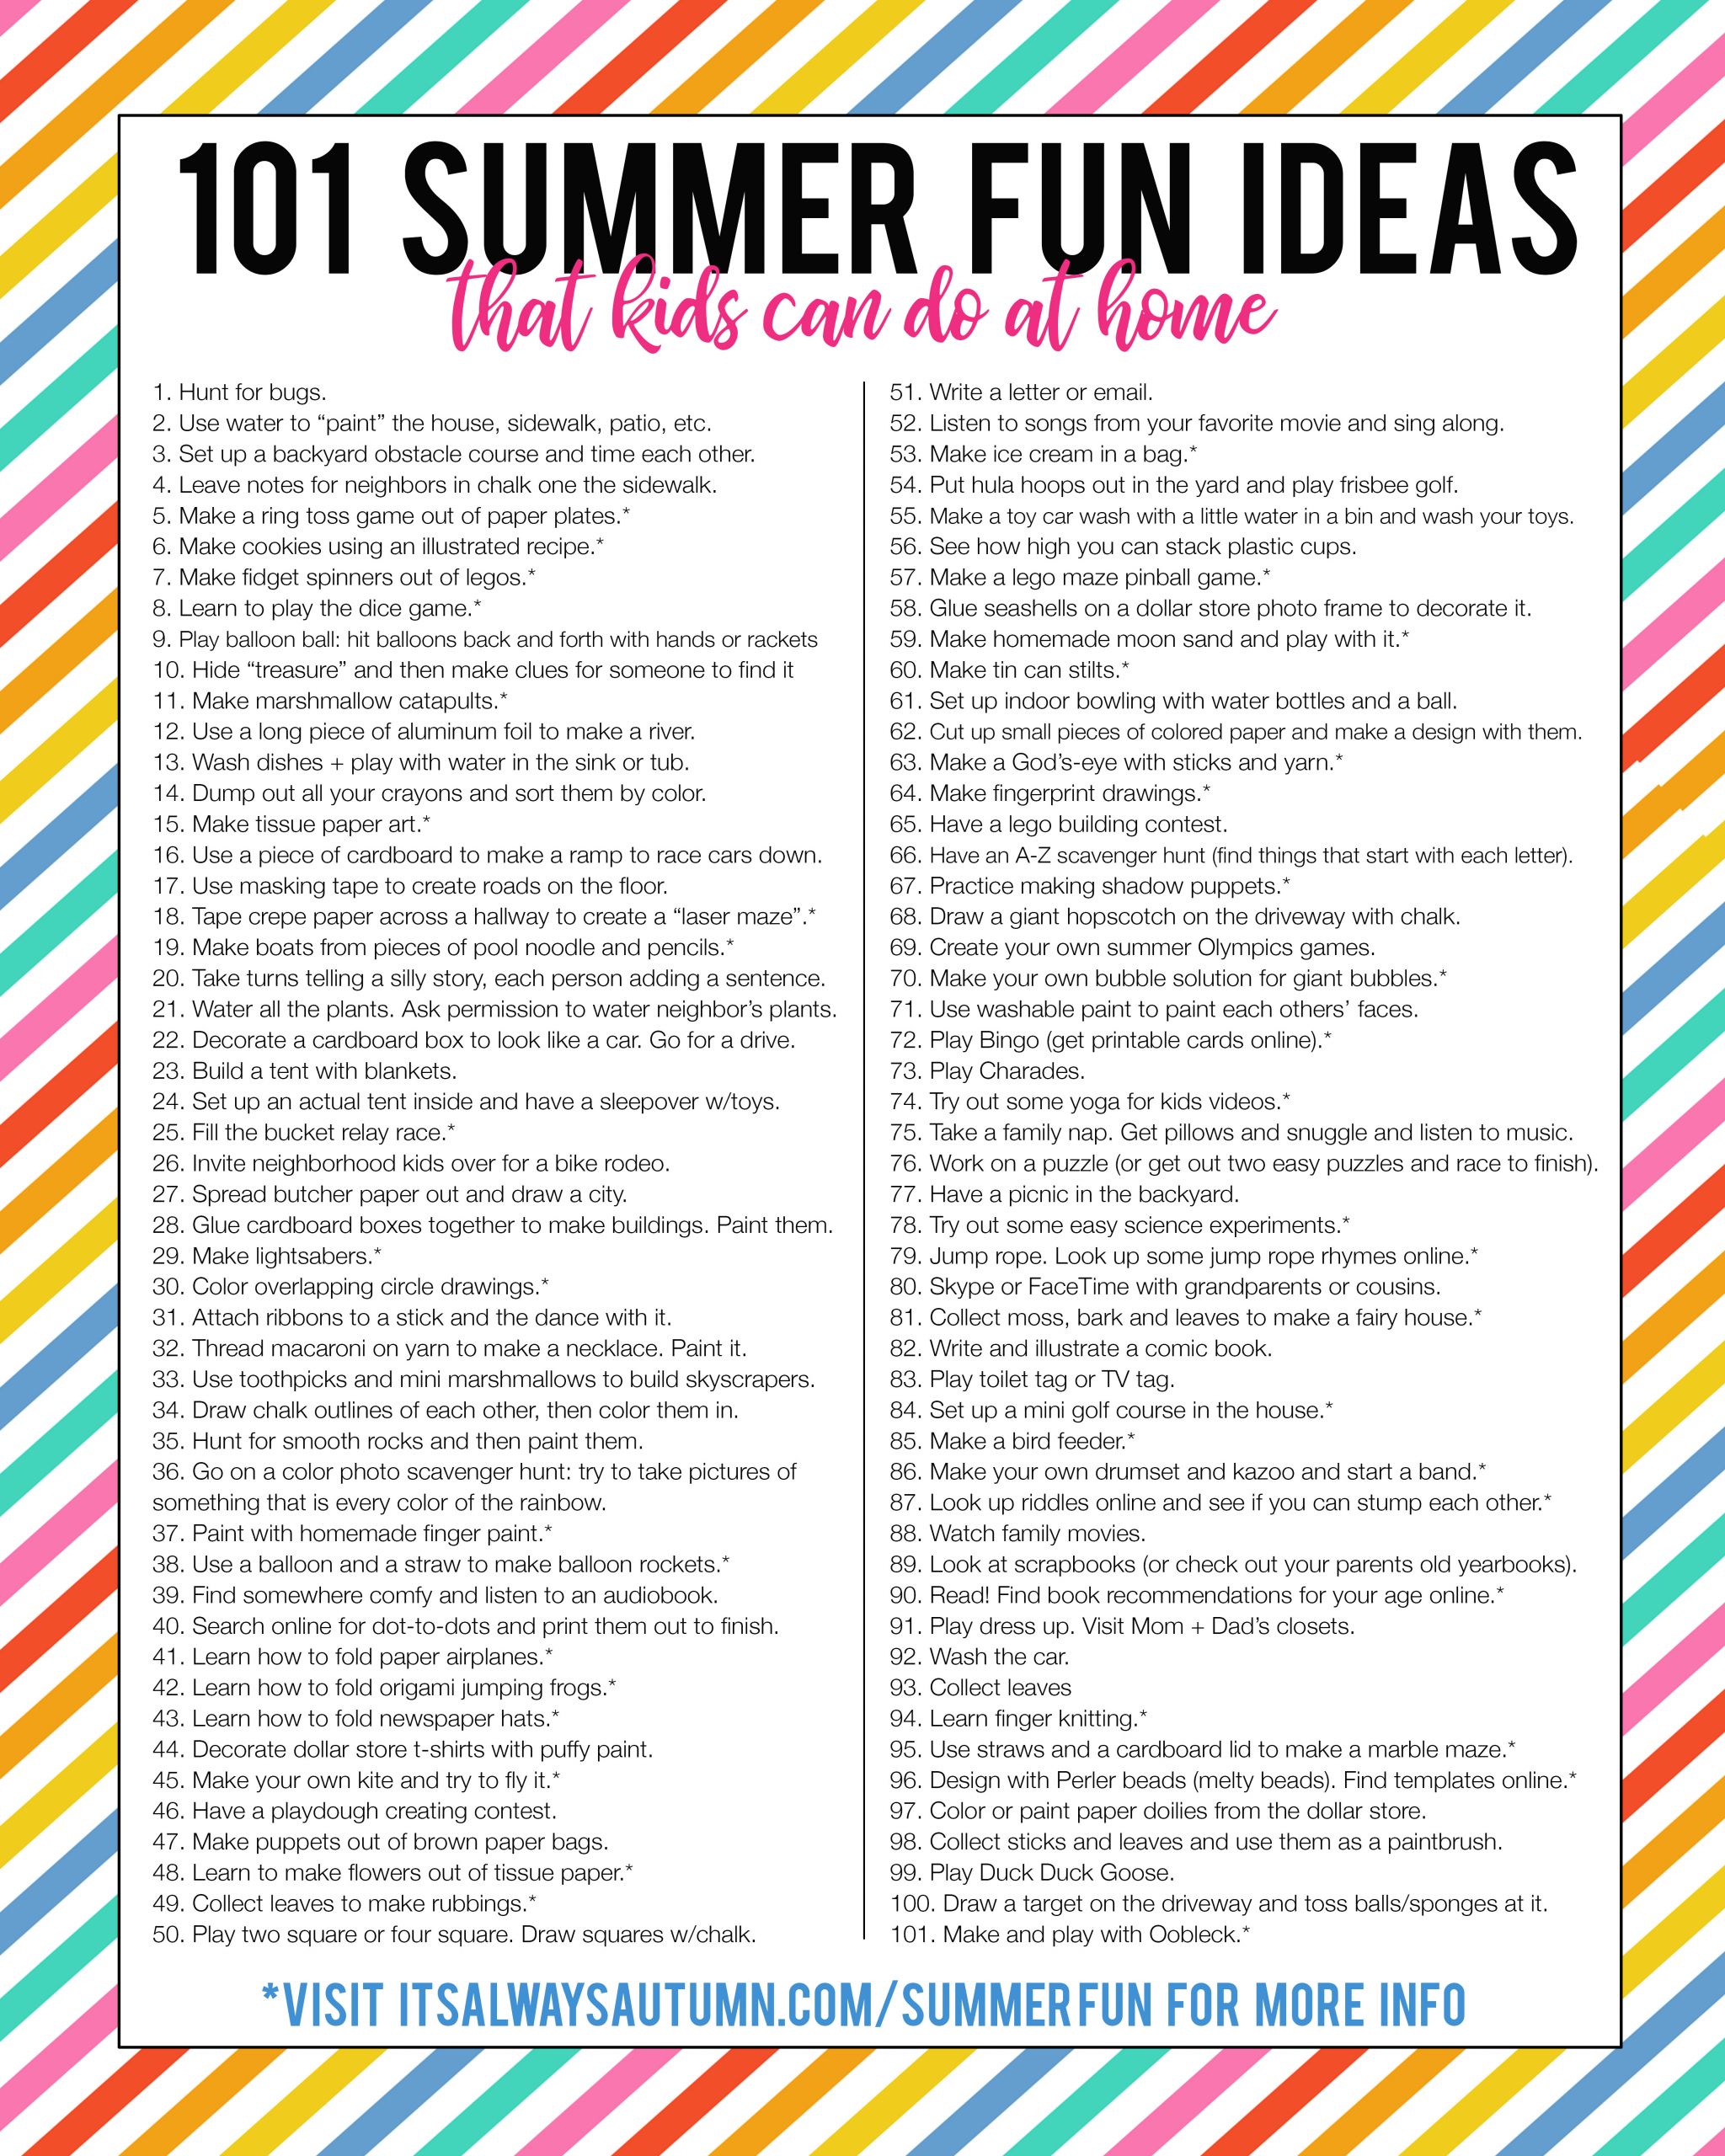 Fun Summer Ideas
 101 awesome summer activities for kids they can do at home